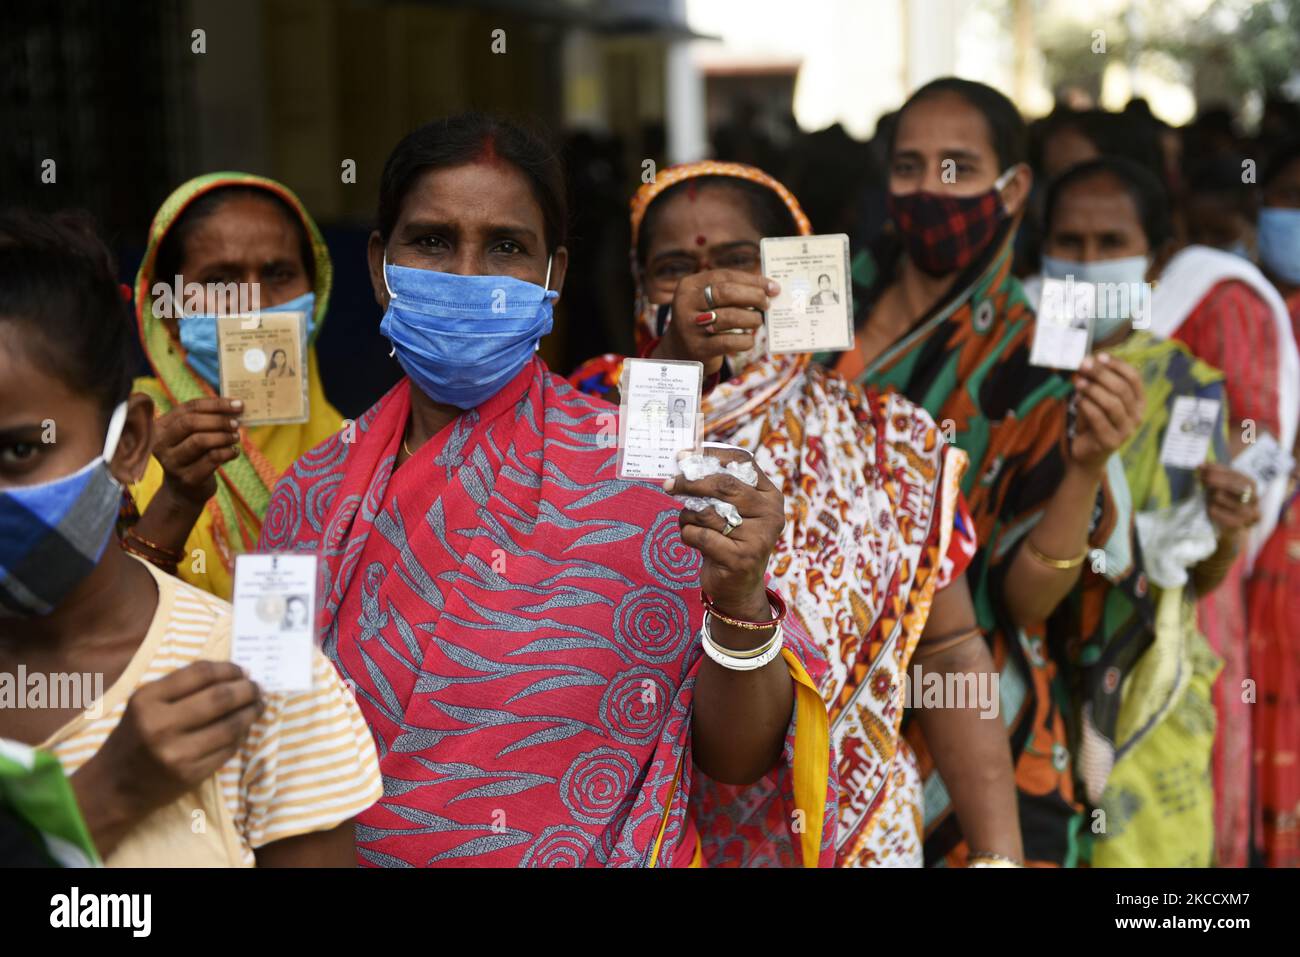 Indian voters queue to cast their votes at a polling station during the during the Fifth phase West Bengal assembly election in Kolkata, India, 17 April, 2021. Election Commission has decided to ban rallies, public meeting and streets play in poll-bound West Bengal from 7 pm to 10 am due to the Covid-19 spike in India according to an Indian media report. (Photo by Indranil Aditya/NurPhoto) Stock Photo